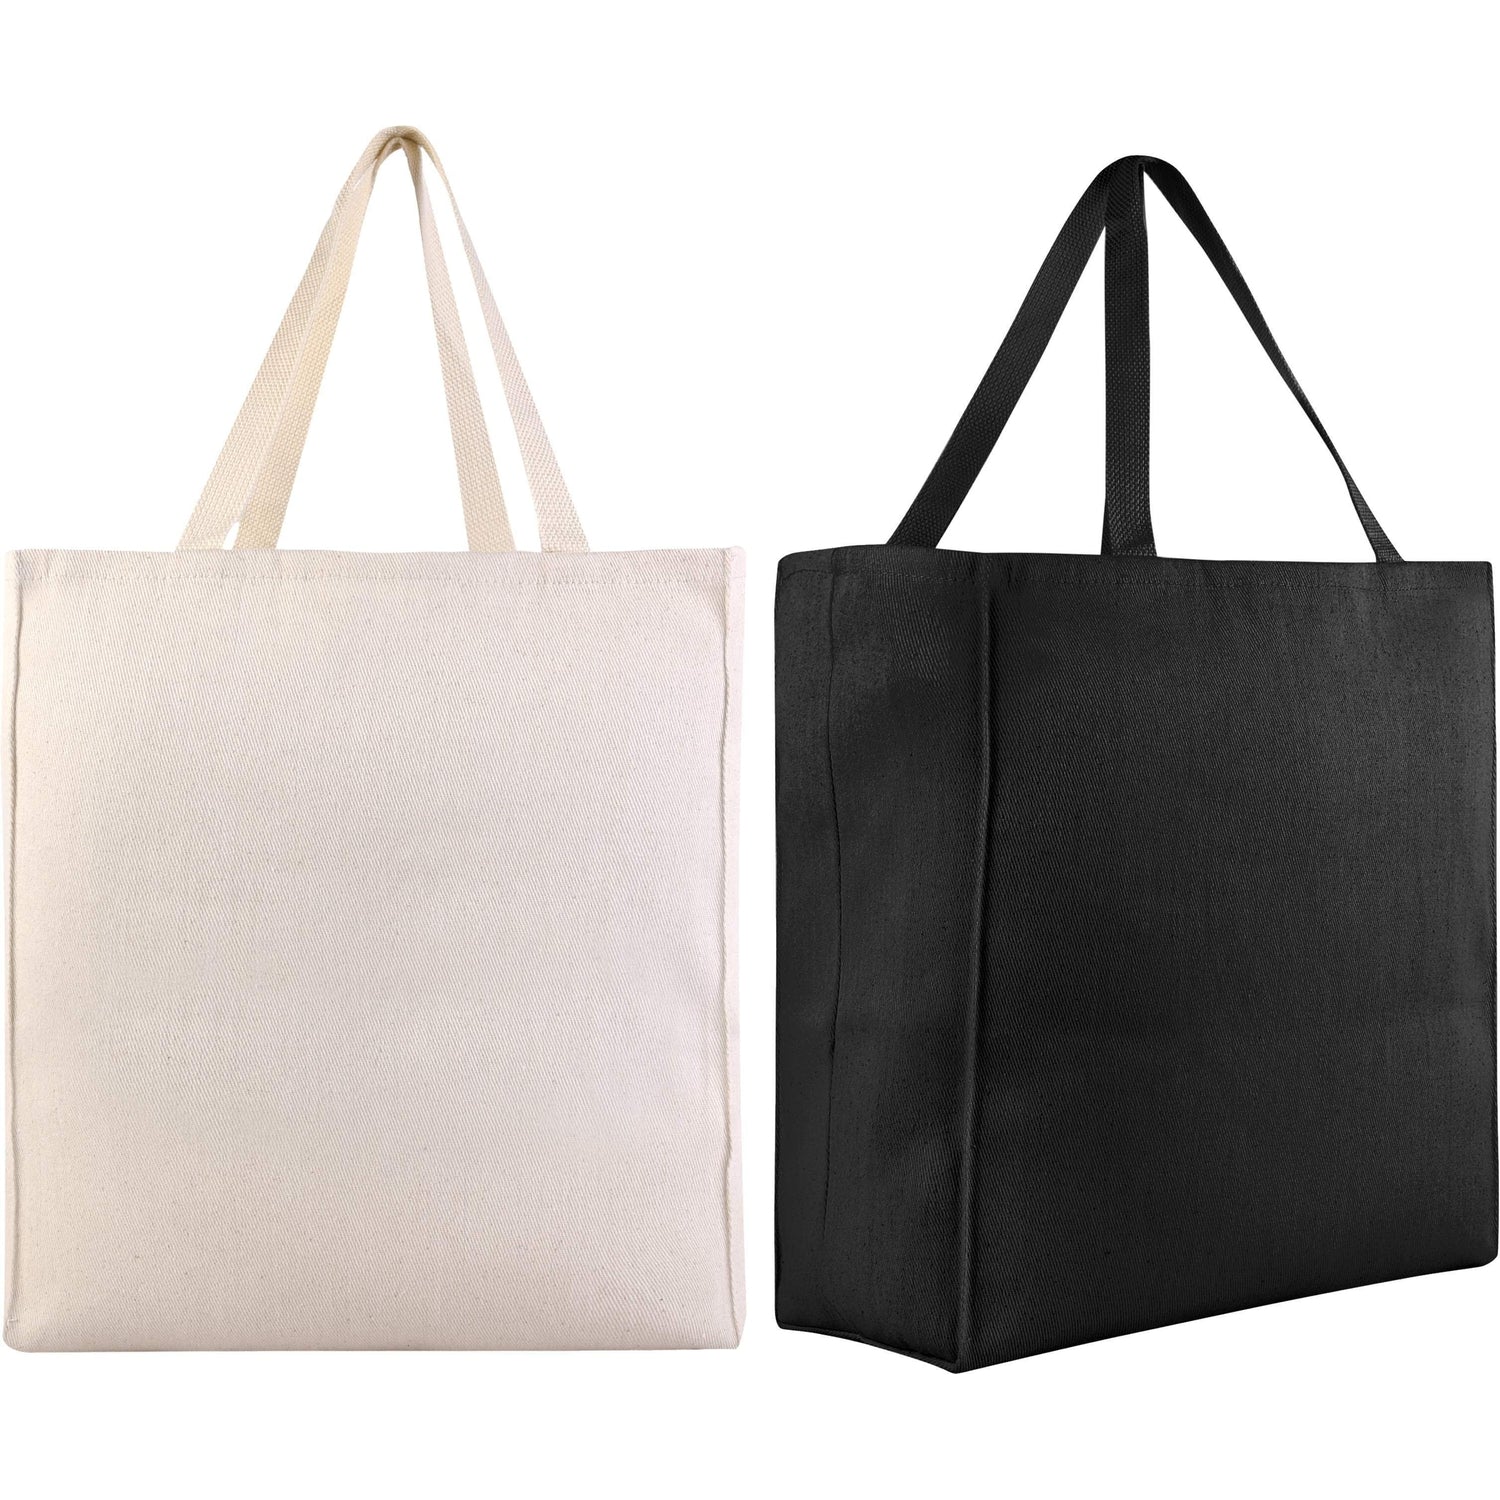 Reusable Shopping Bags | Cotton Twill Tote Bags & Grocery Bags in Bulk ...